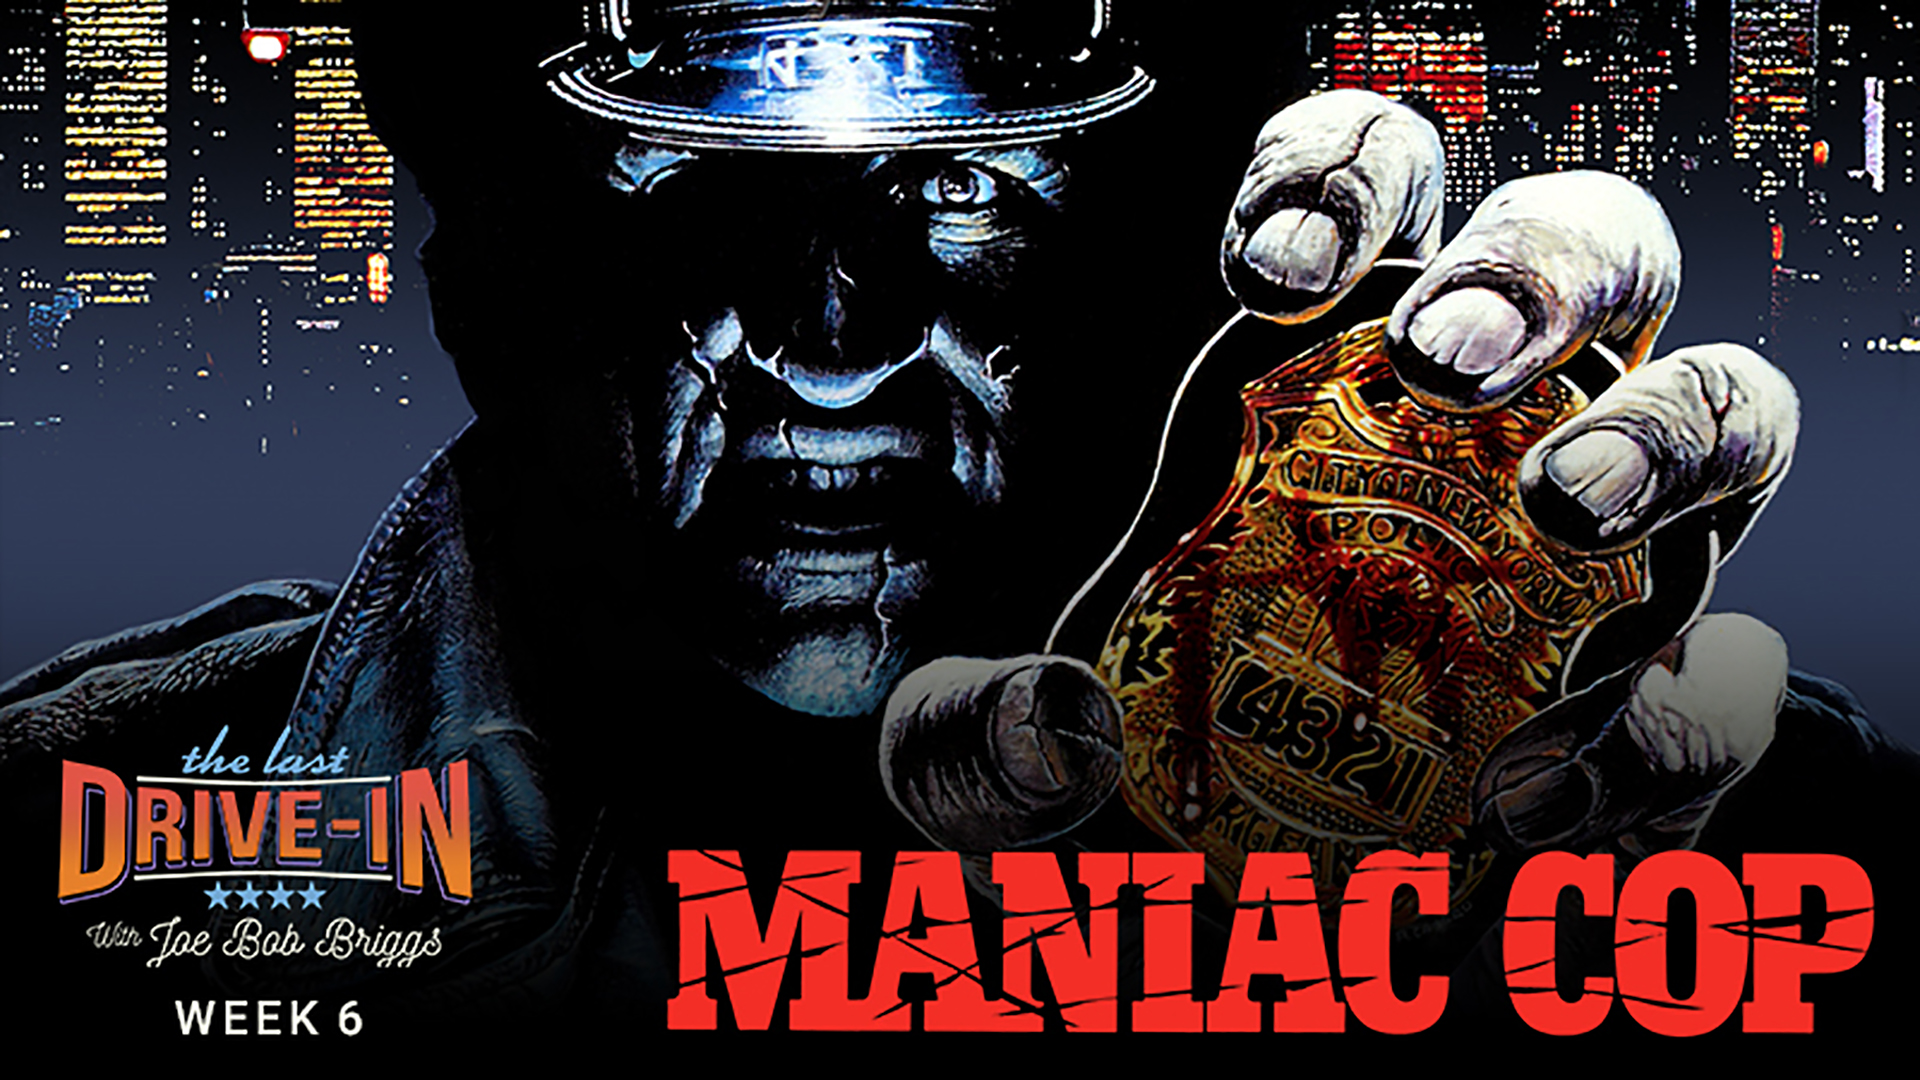 Week 6: Maniac Cop, Police search for a killer in uniform who should be dead., TV-MA, Season 1028423, Episode 11